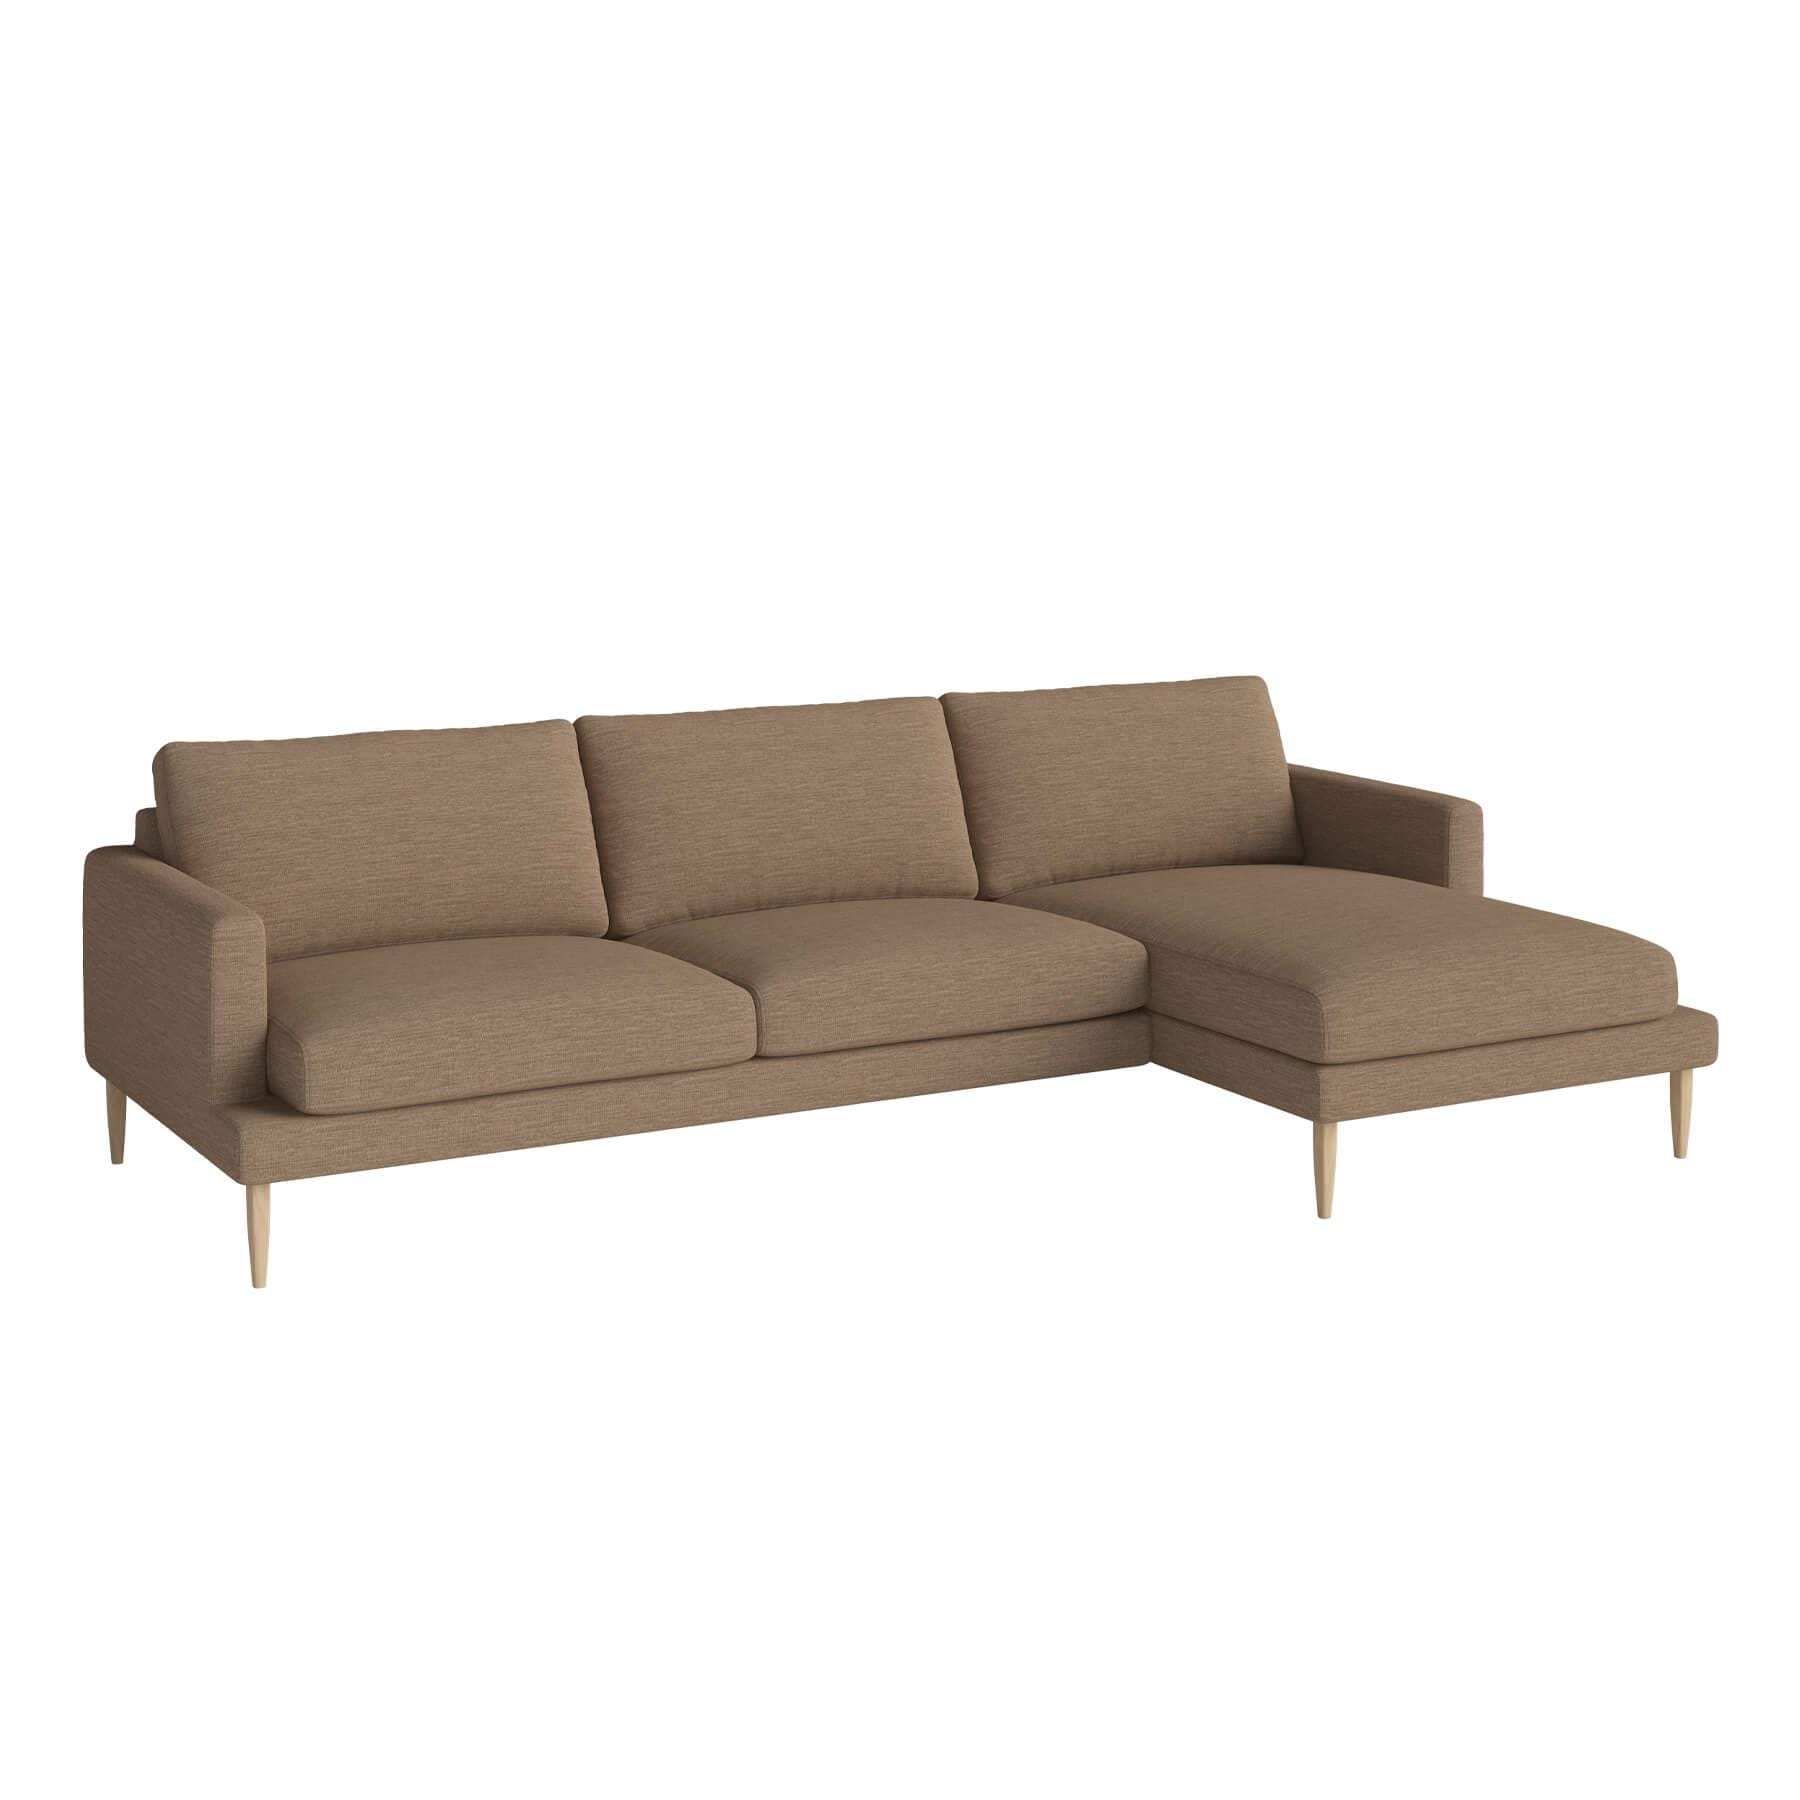 Bolia Veneda Sofa 35 Seater Sofa With Chaise Longue White Oiled Oak Laine Light Brown Right Brown Designer Furniture From Holloways Of Ludlow